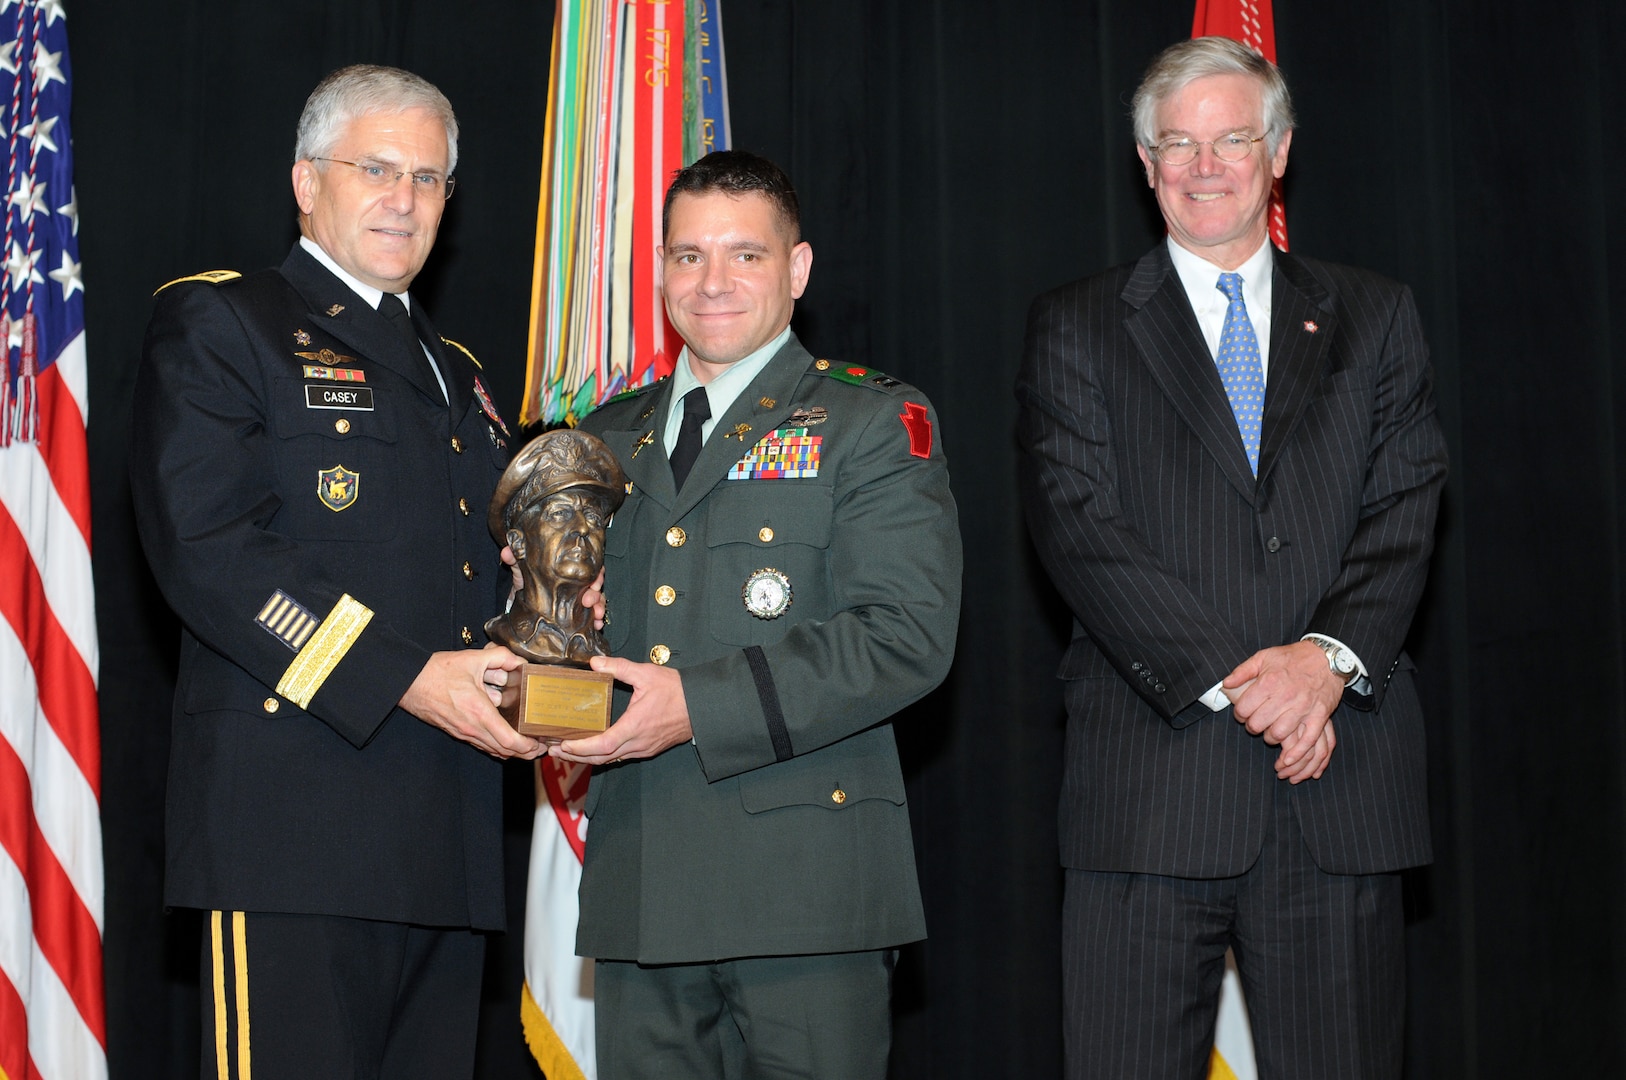 Army Chief of Staff Gen. George W. Casey Jr. presents the MacArthur Award to Capt. Cliff A. Morales from the Pennsylvania Army National Guard during a Pentagon ceremony Friday as the MacArthur Foundation's Henry Harris III observes the presentation.